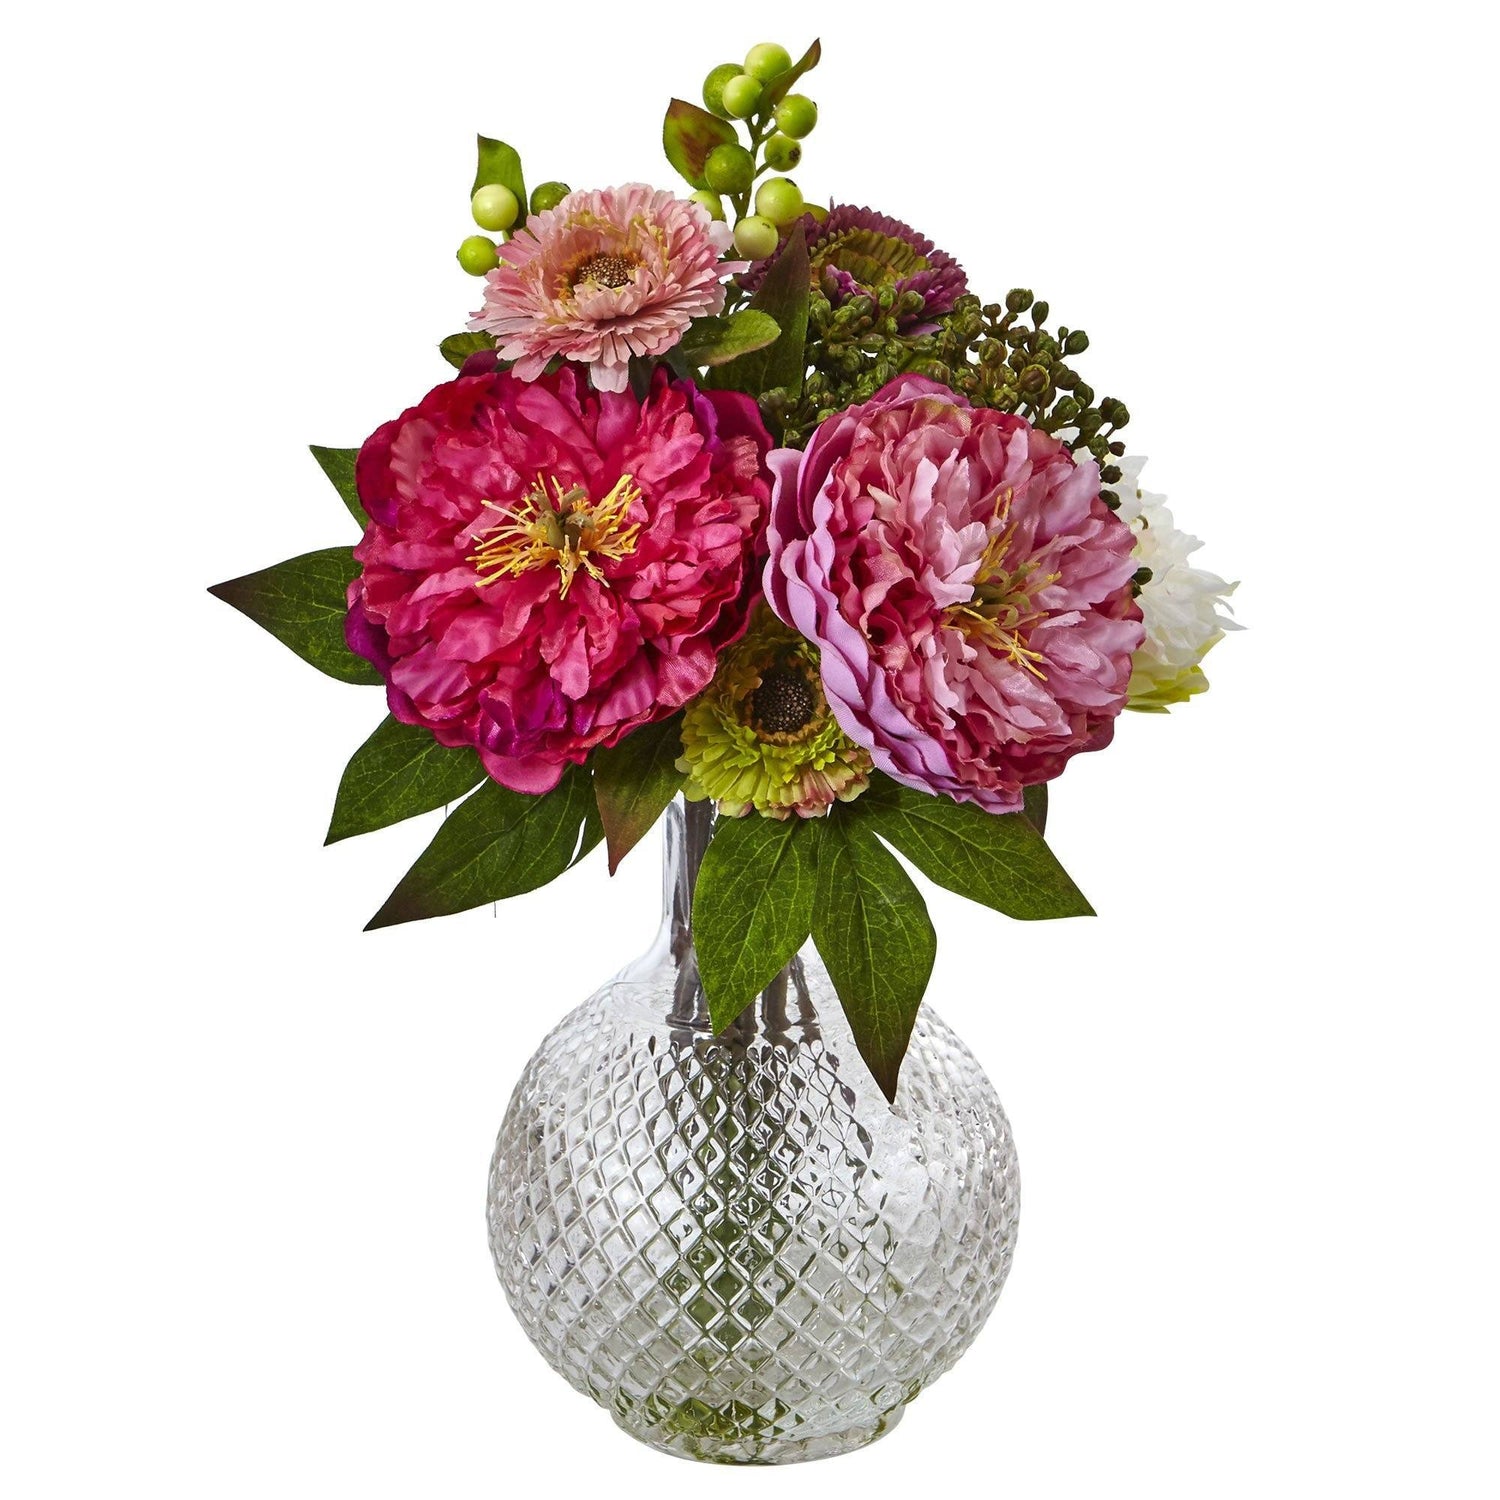 14" Artificial Peony and Mum in Glass Vase"